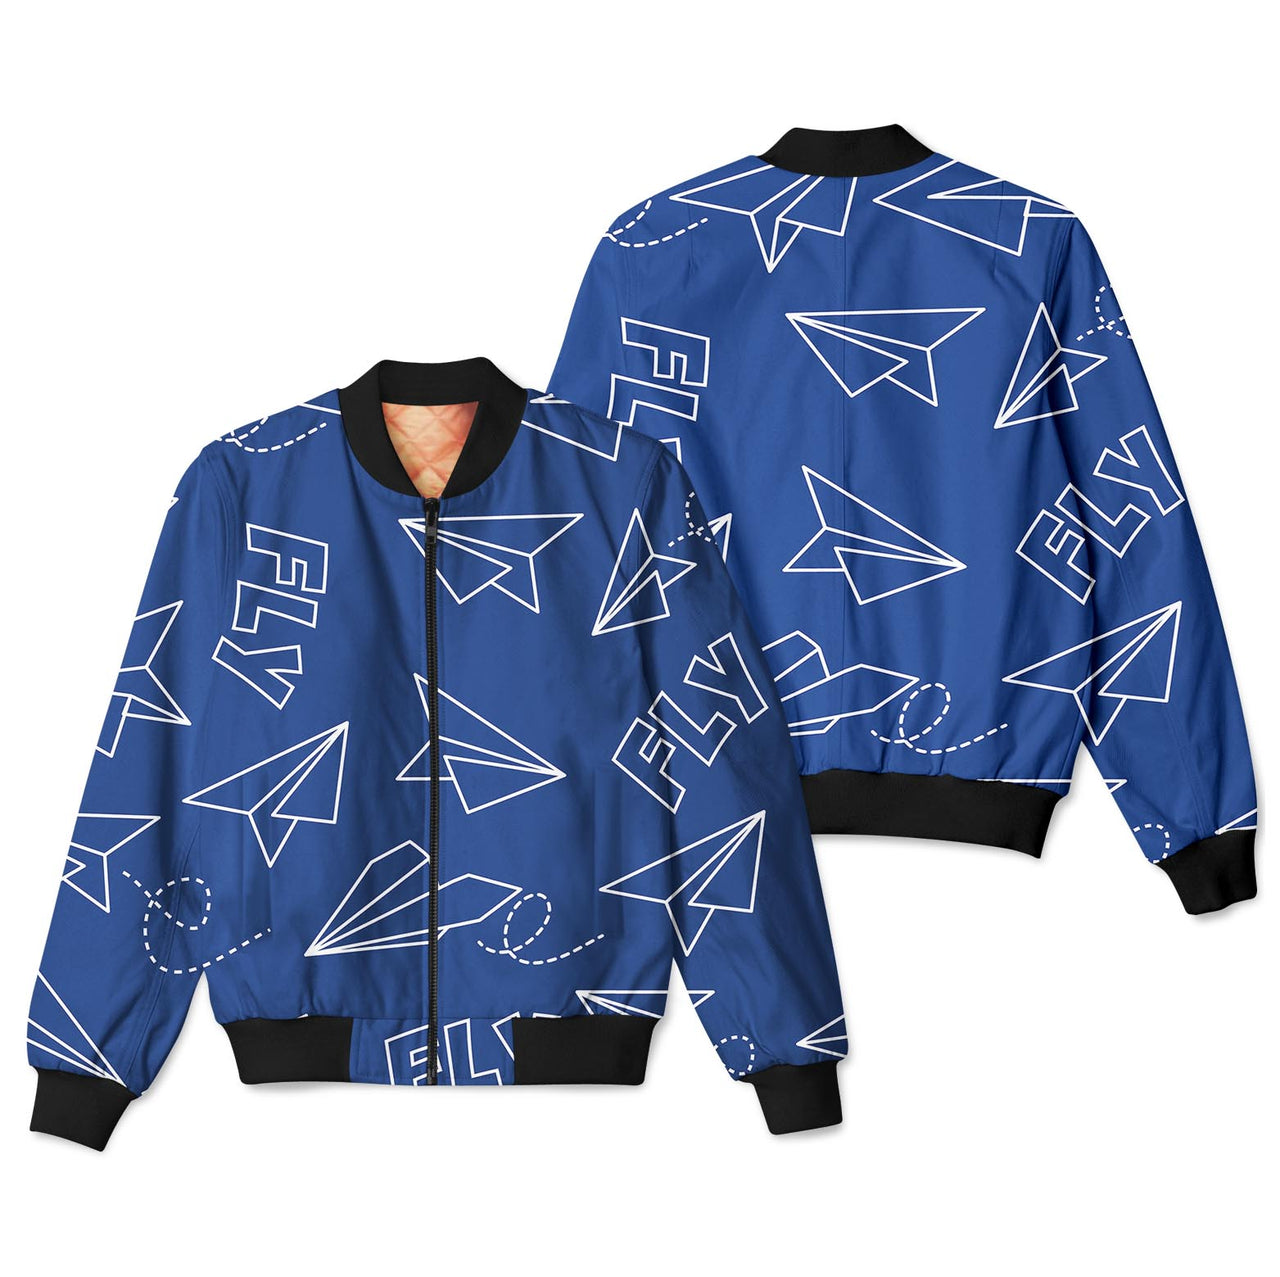 Paper Airplane & Fly (Blue) Designed 3D Pilot Bomber Jackets